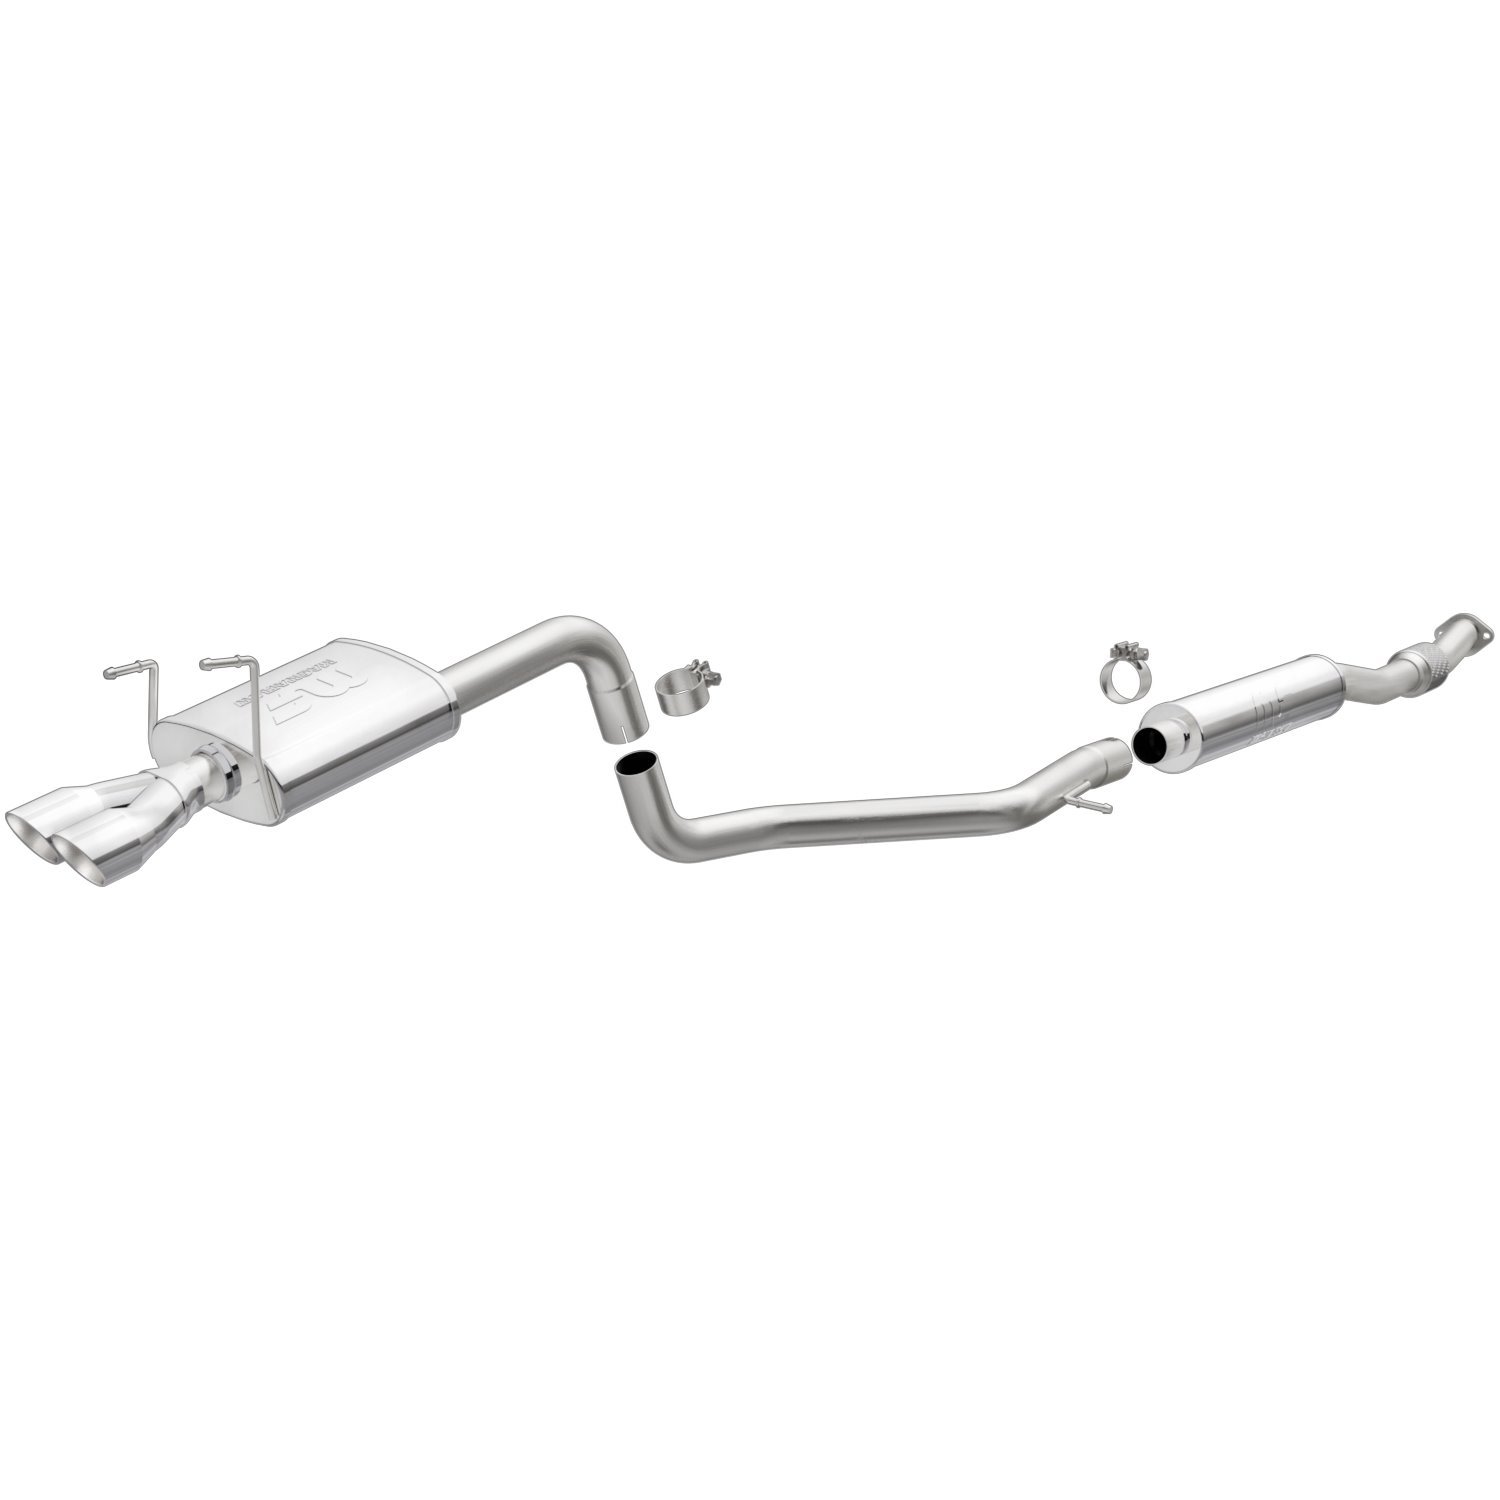 Cat-Back Exhaust System 2012-2019 Fiat 500 1.4L L4 (Excludes Turbo)